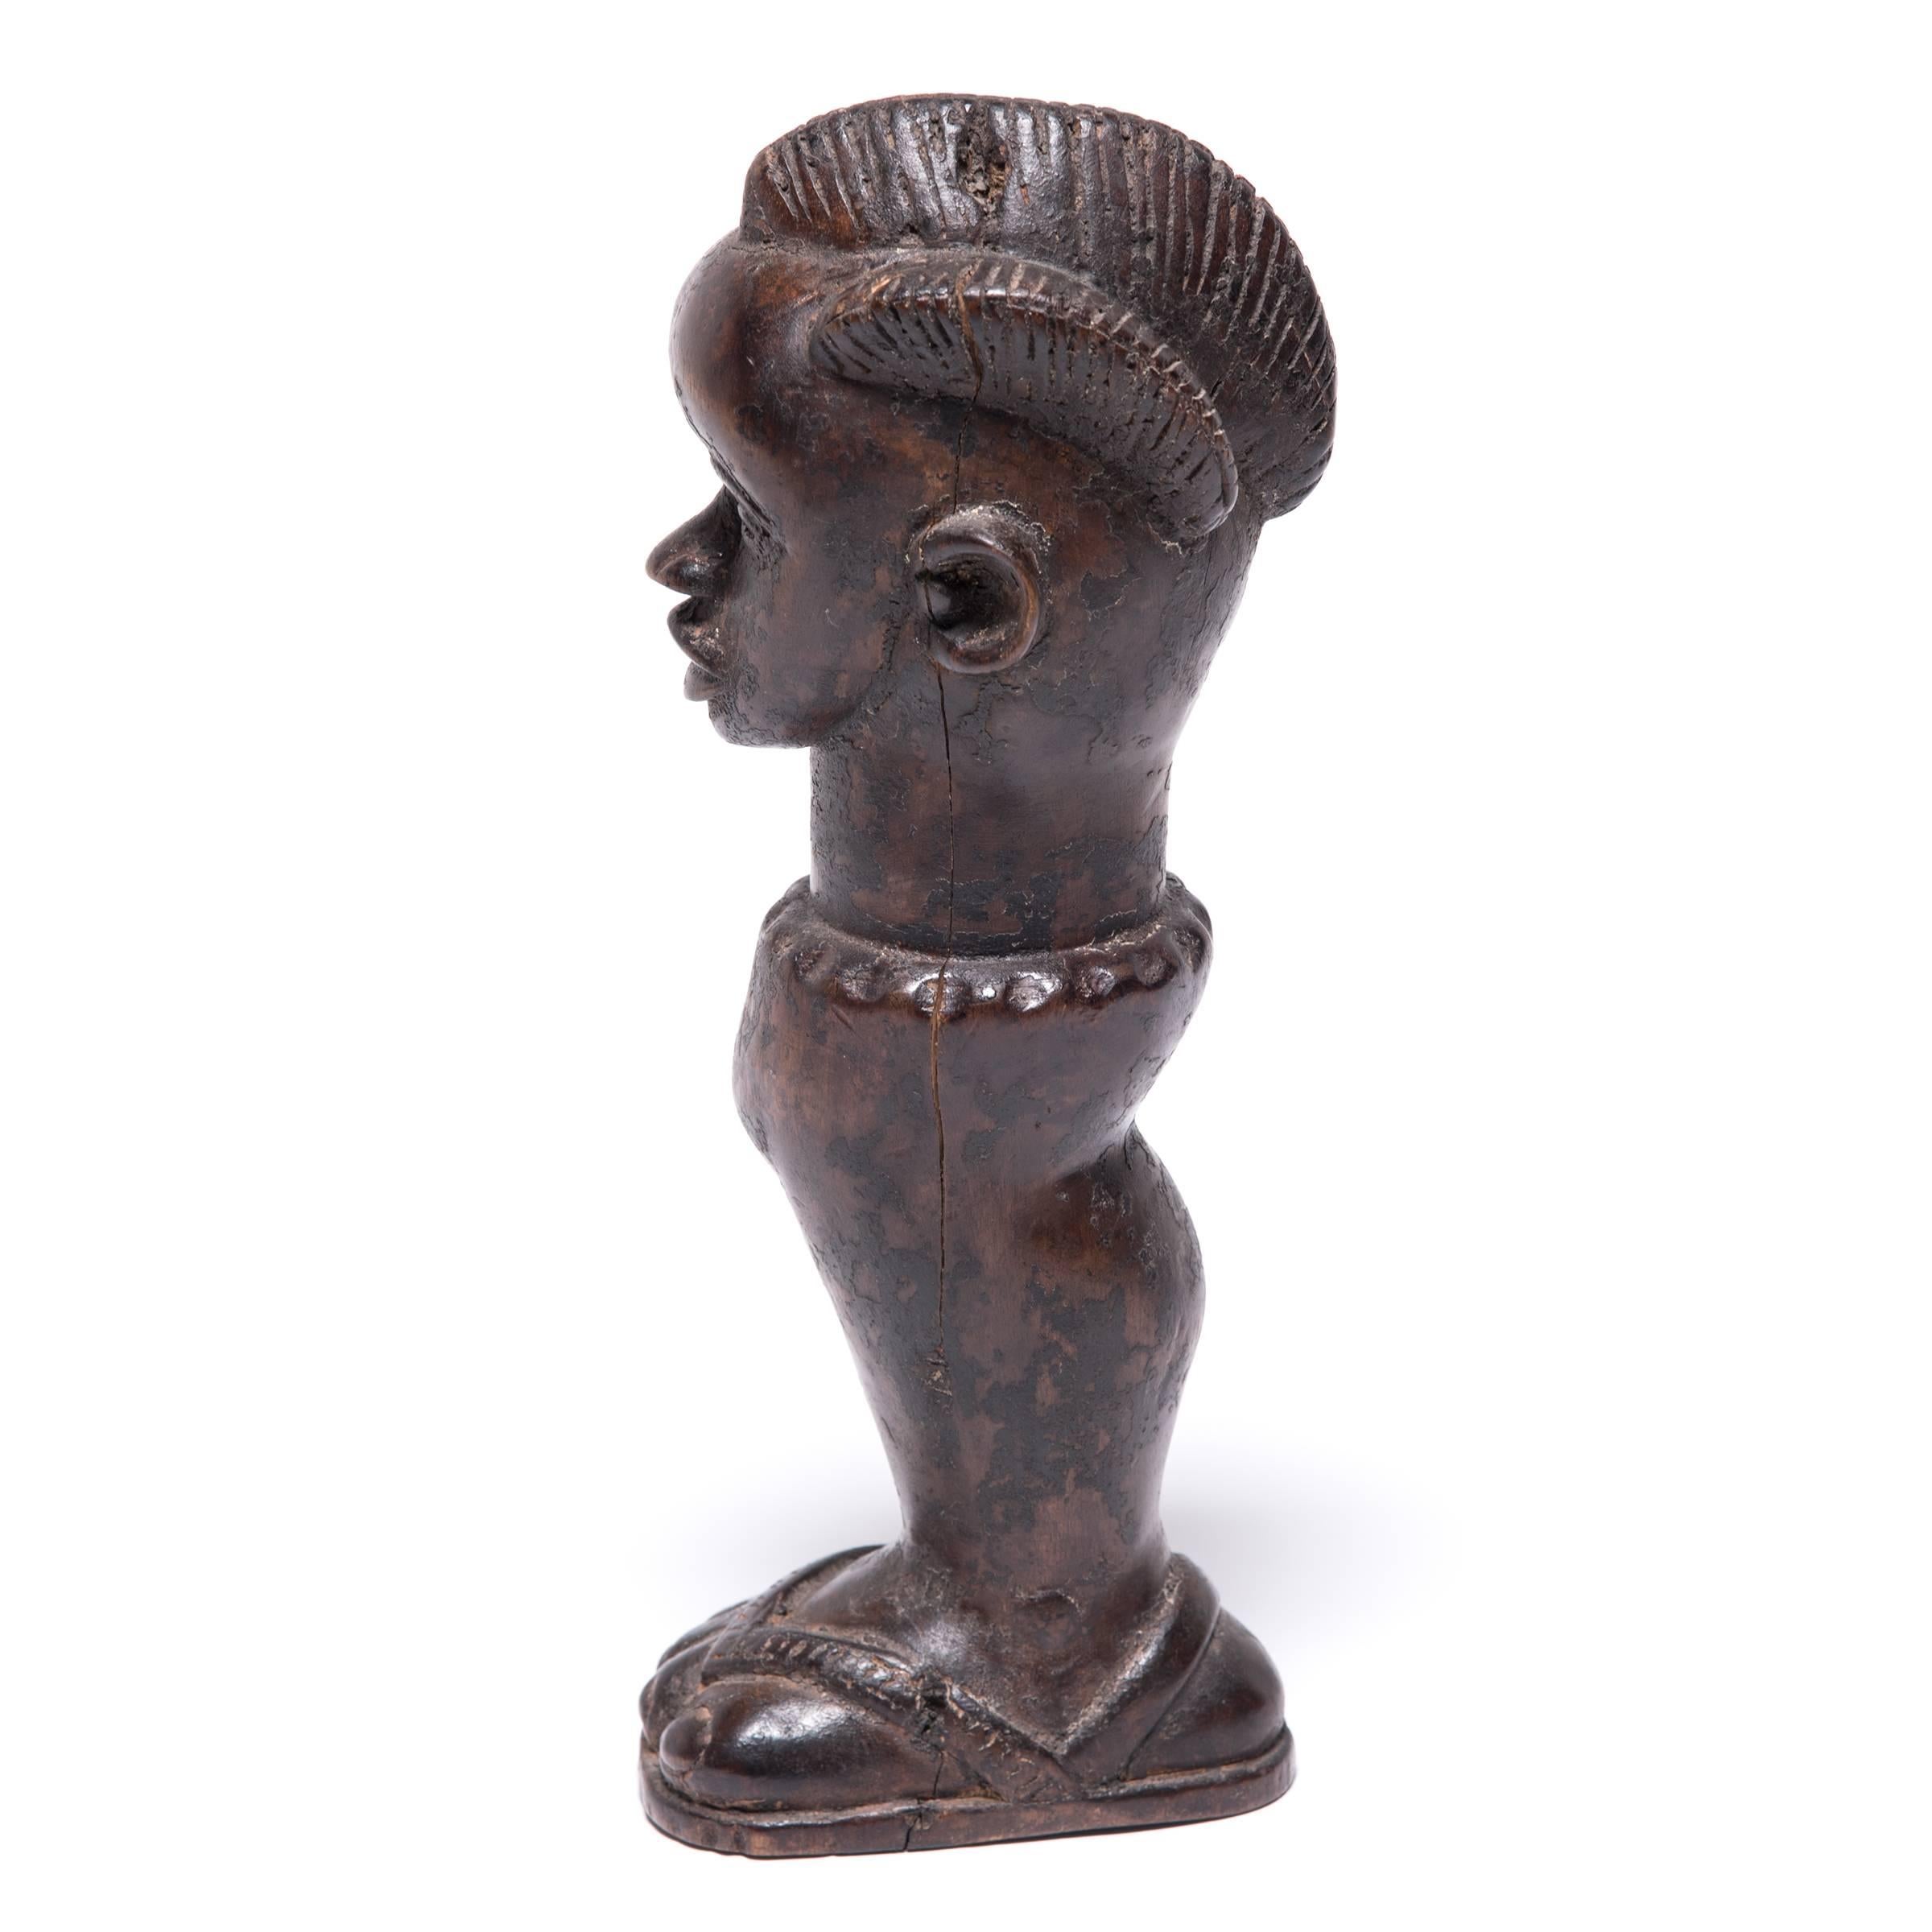 Showcasing the smooth, restrained sculptural style of the Dan people of Western Africa, this fetish figure from the early 20th century would have been called upon to bring good luck, keep away evil spirits, or connect with ancestors. Imbued with